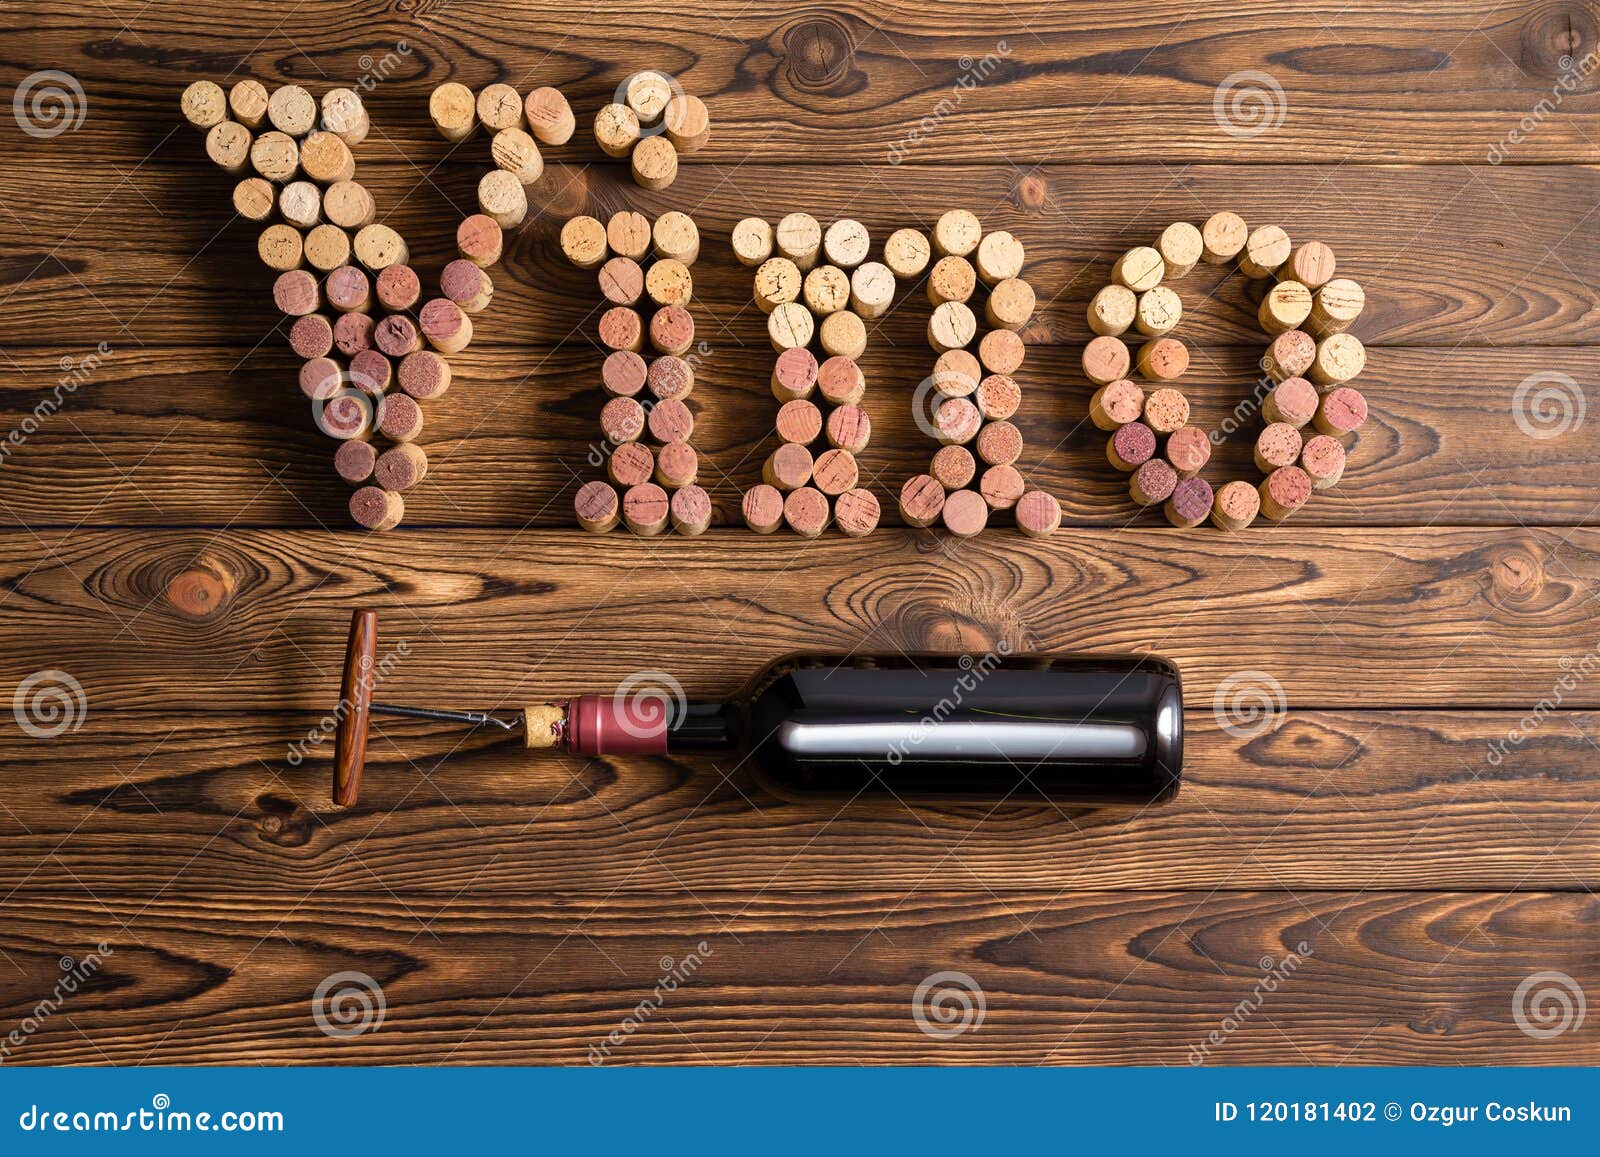 vino lettering with bottle of wine on wood